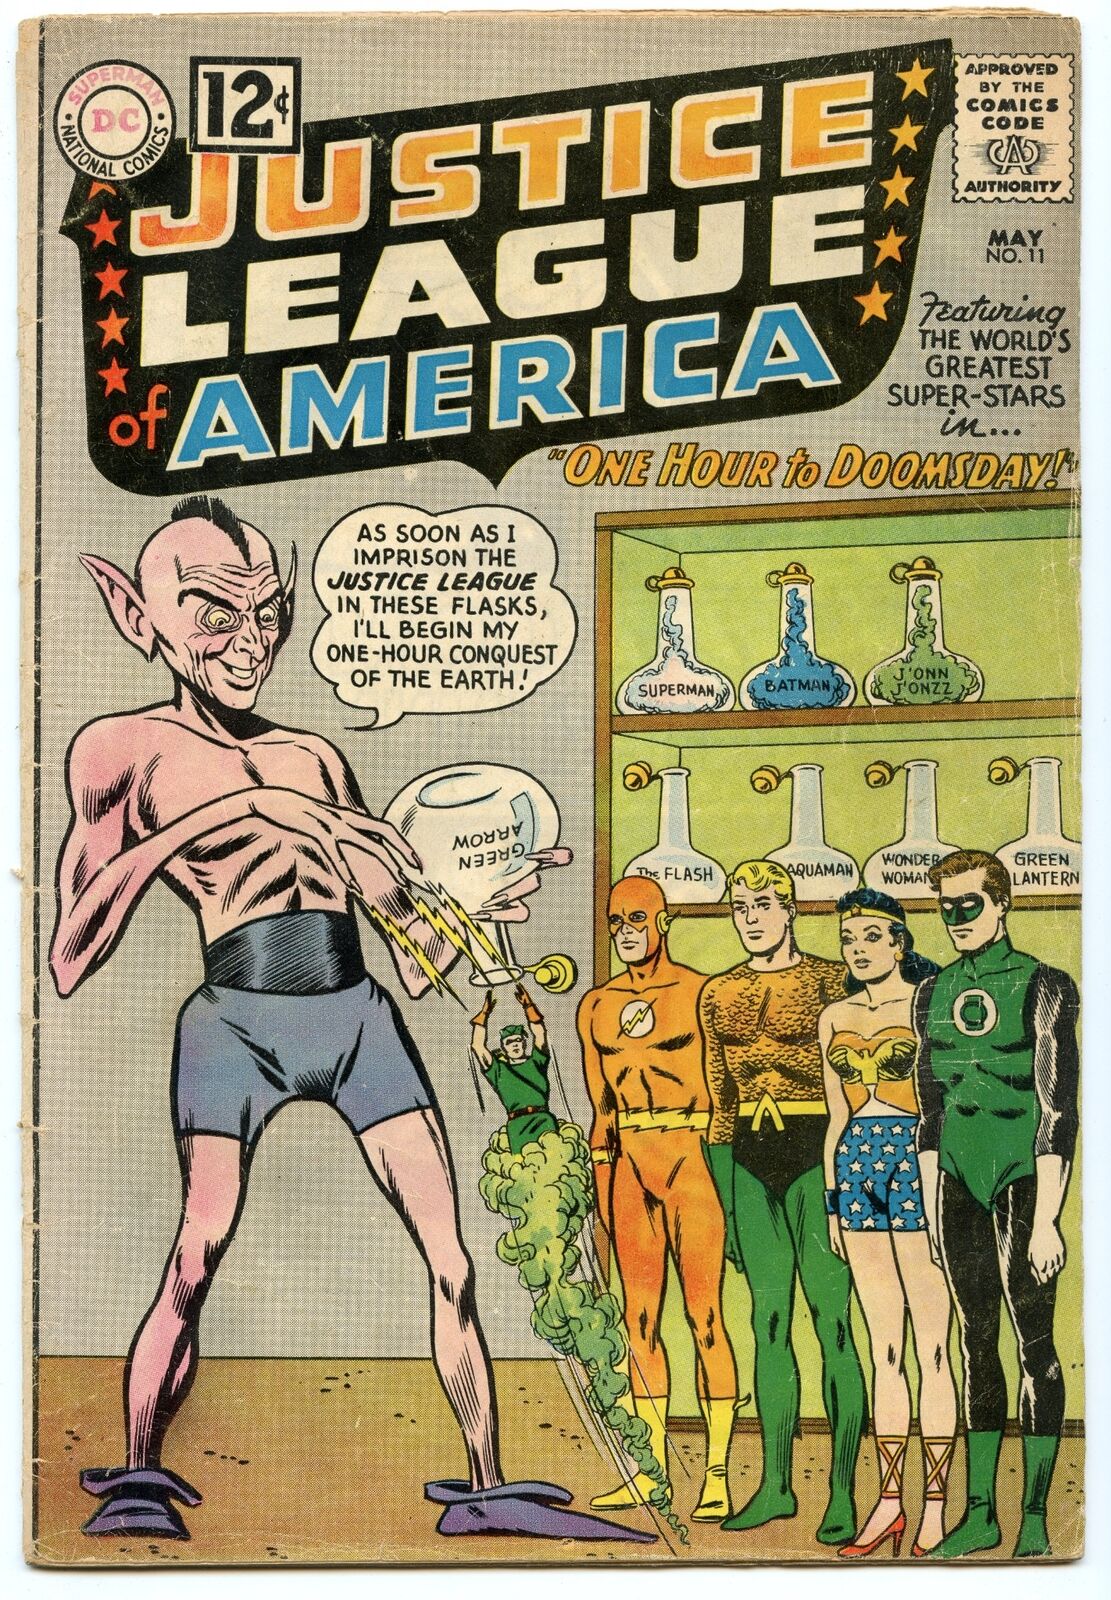 Justice League of America 11 (May 1962) VG- (3.5)